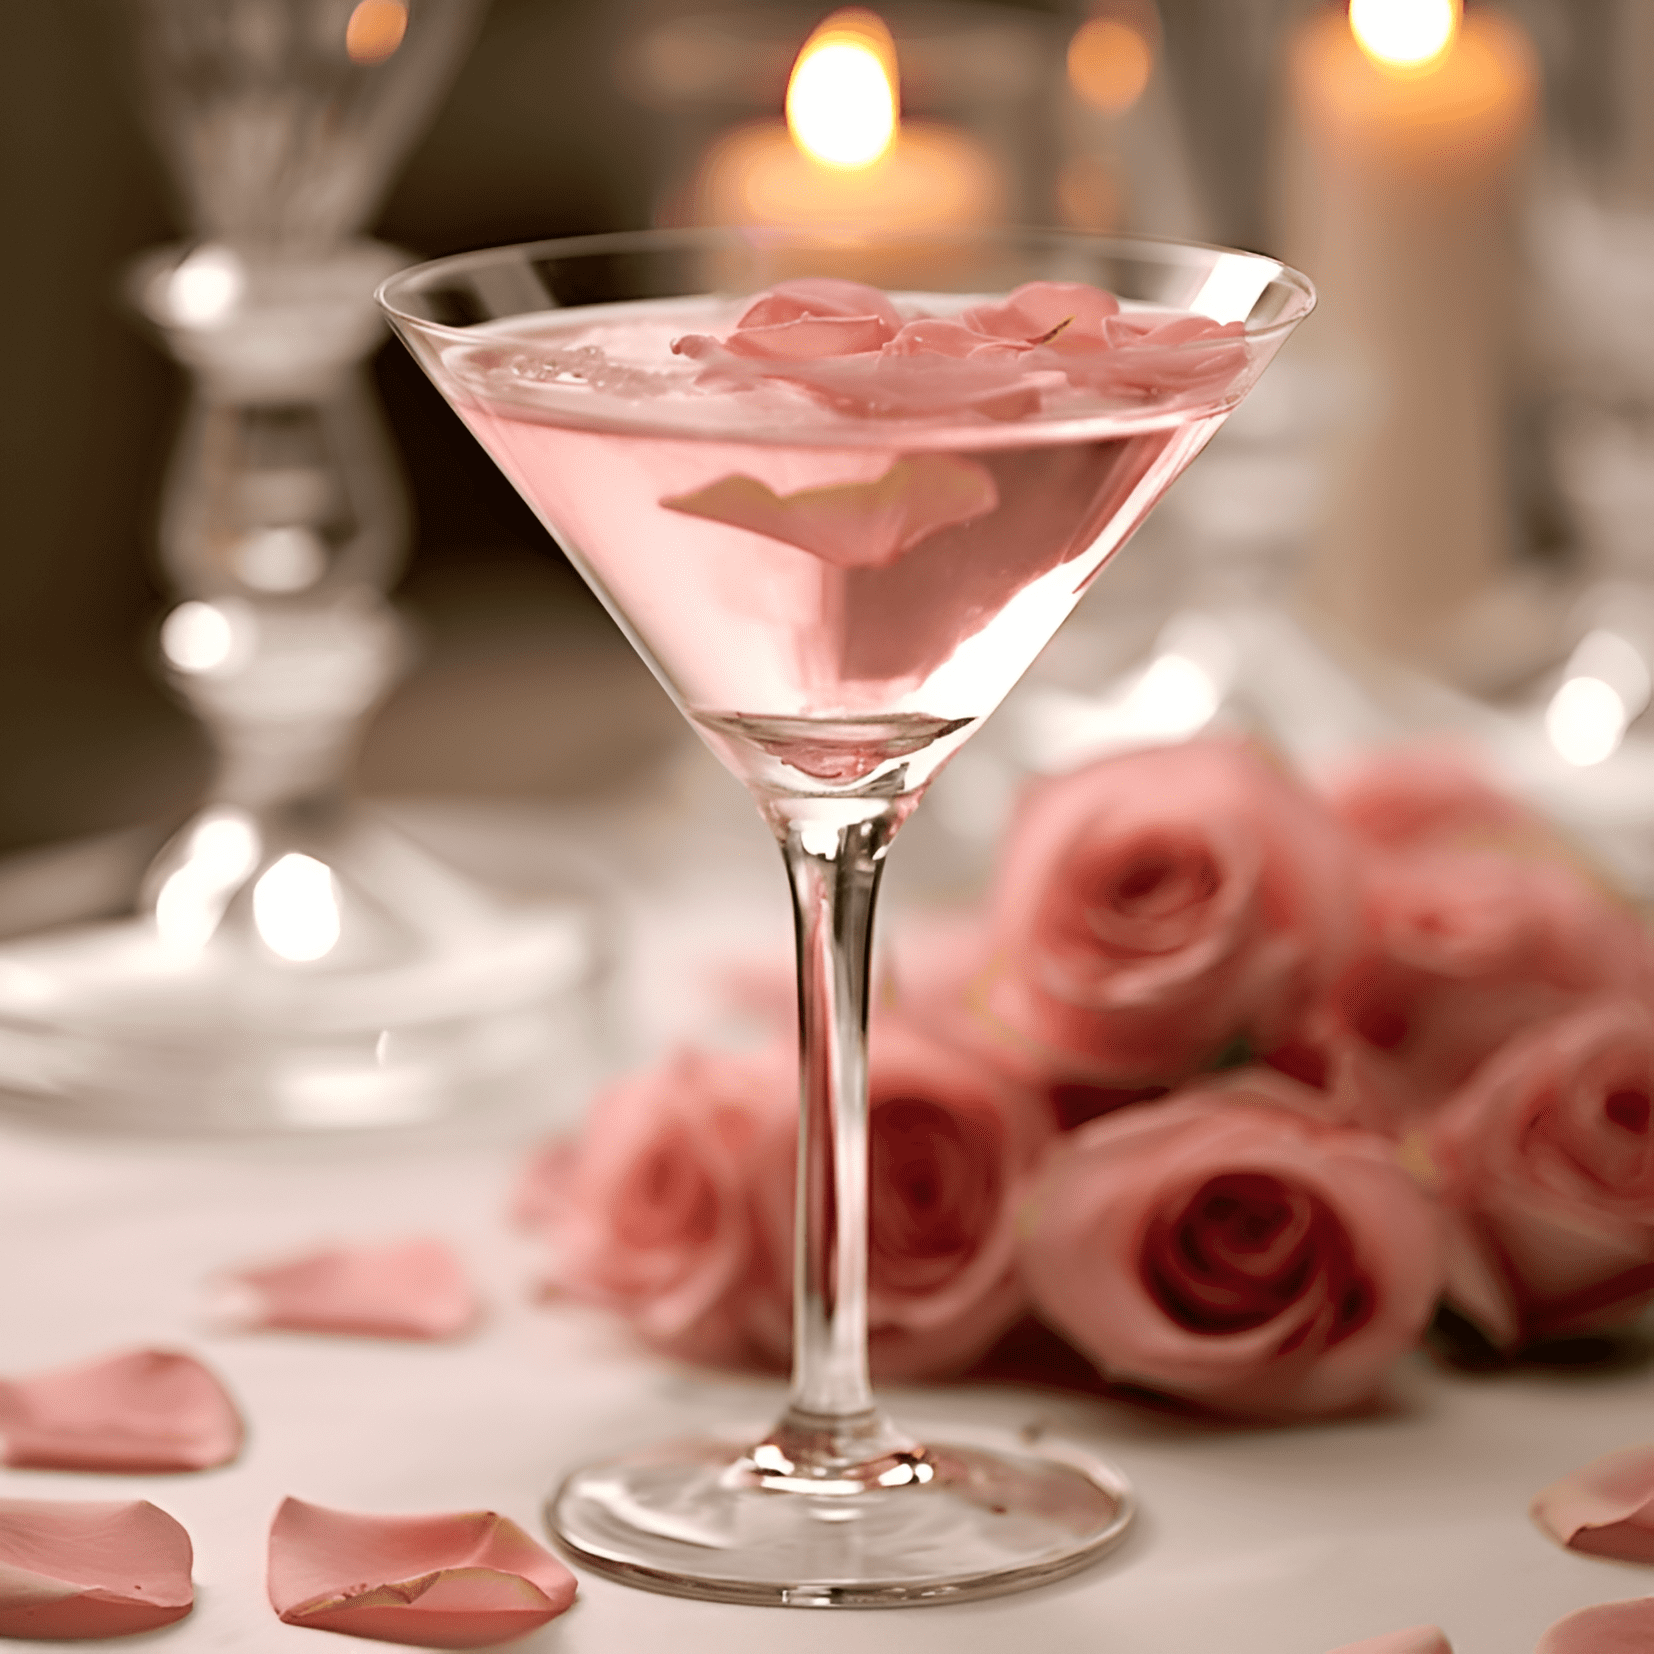 Rose Cocktail Recipe - The Rose cocktail has a delicate and floral taste, with a hint of sweetness from the raspberry syrup. It is light and refreshing, with a subtle complexity from the combination of vermouth and cherry brandy. The finish is crisp and clean, leaving a pleasant aftertaste.